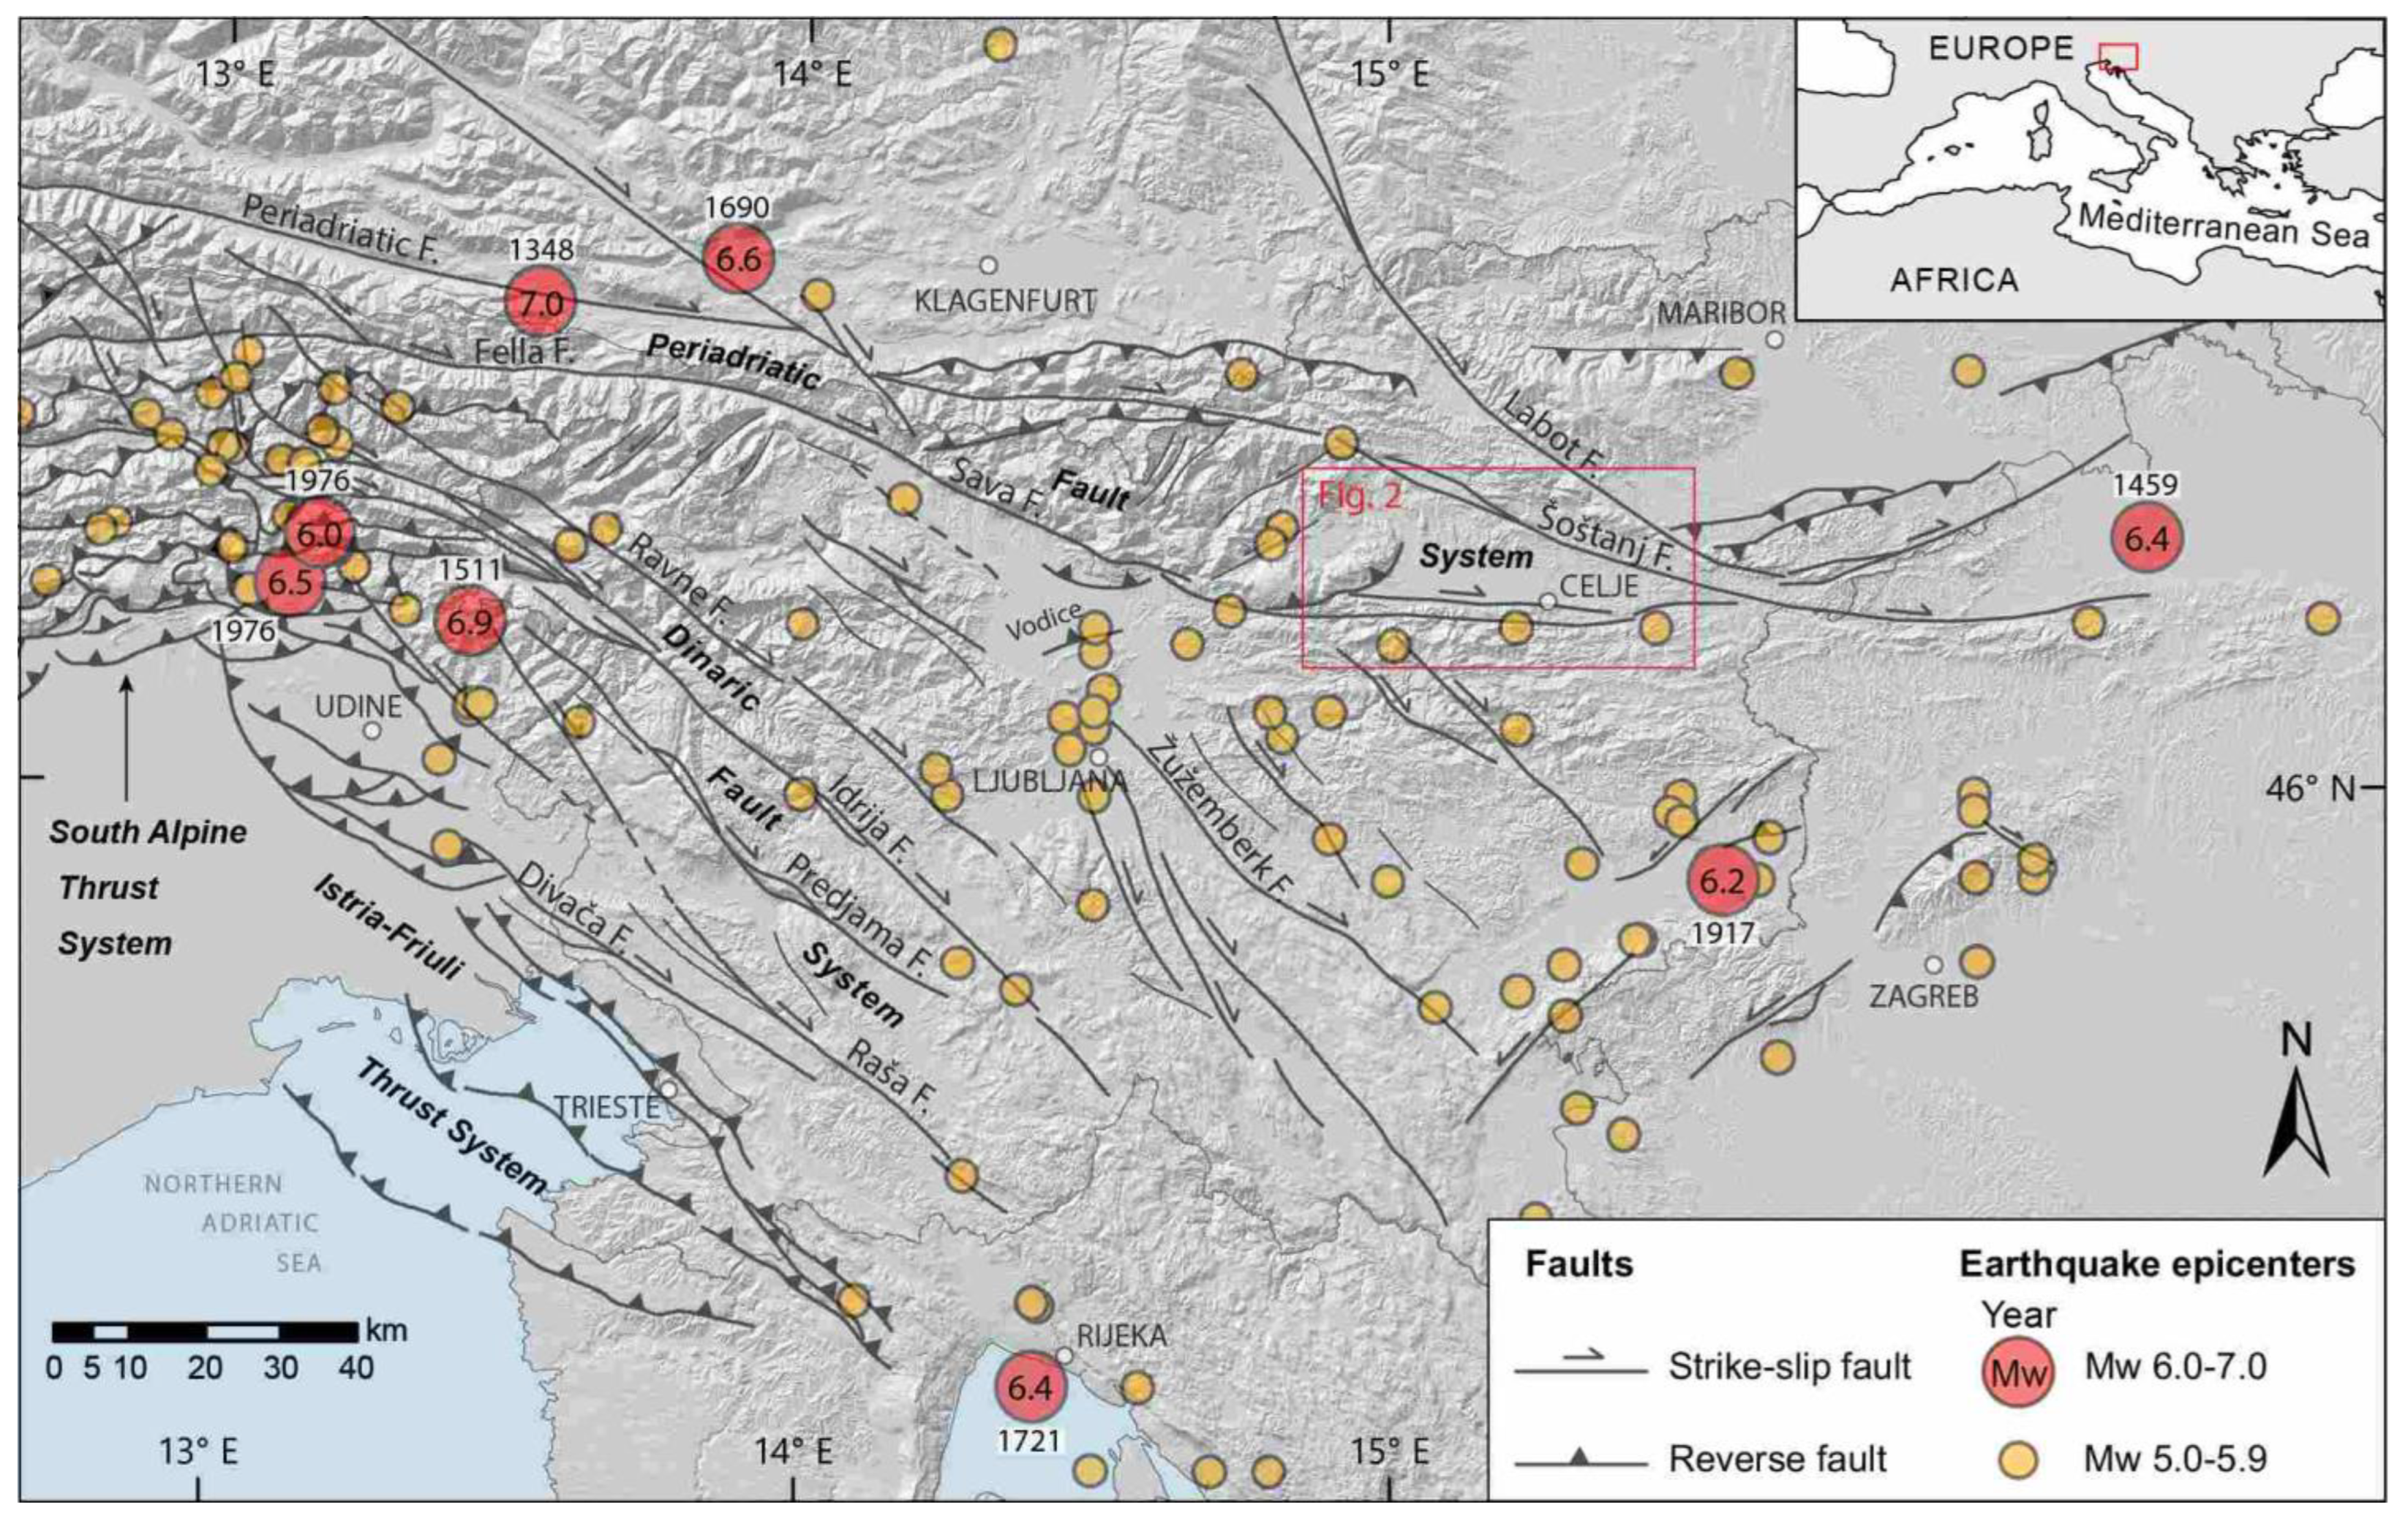 Quaternary | Free Full-Text | Seismic Activity in the Celje Basin  (Slovenia) in Roman Times&mdash;Archaeoseismological Evidence from Celeia